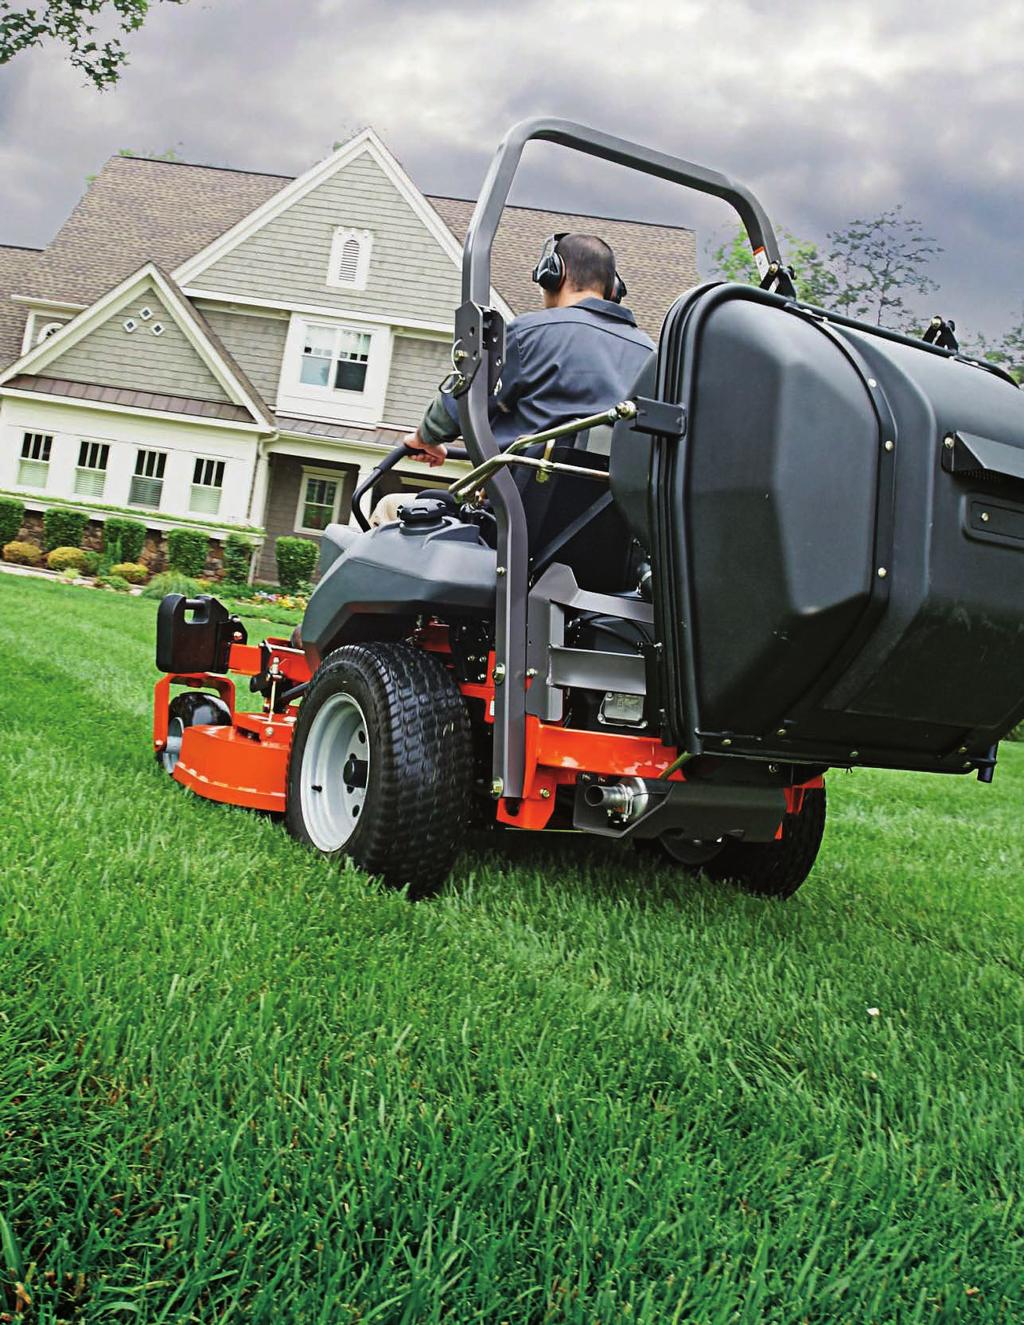 PZ and P-ZT Series Handle the big jobs with quicker turn around.